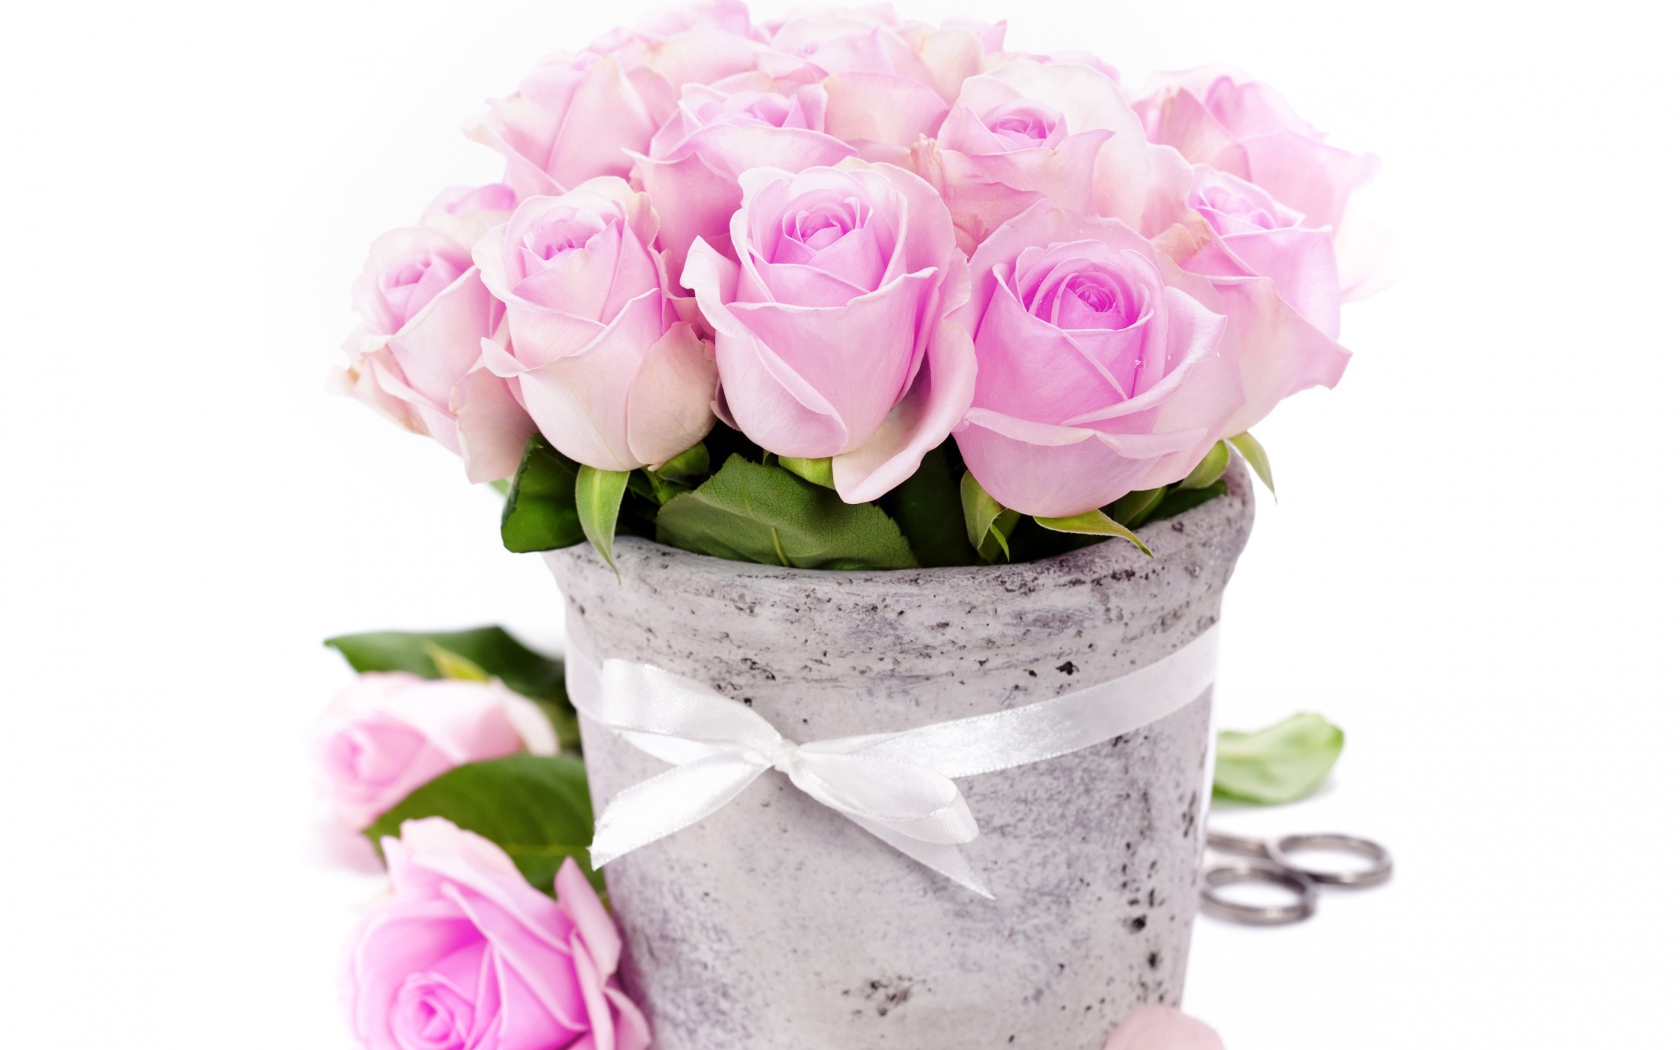 Bouquet of pink roses in a vase with a white ribbon